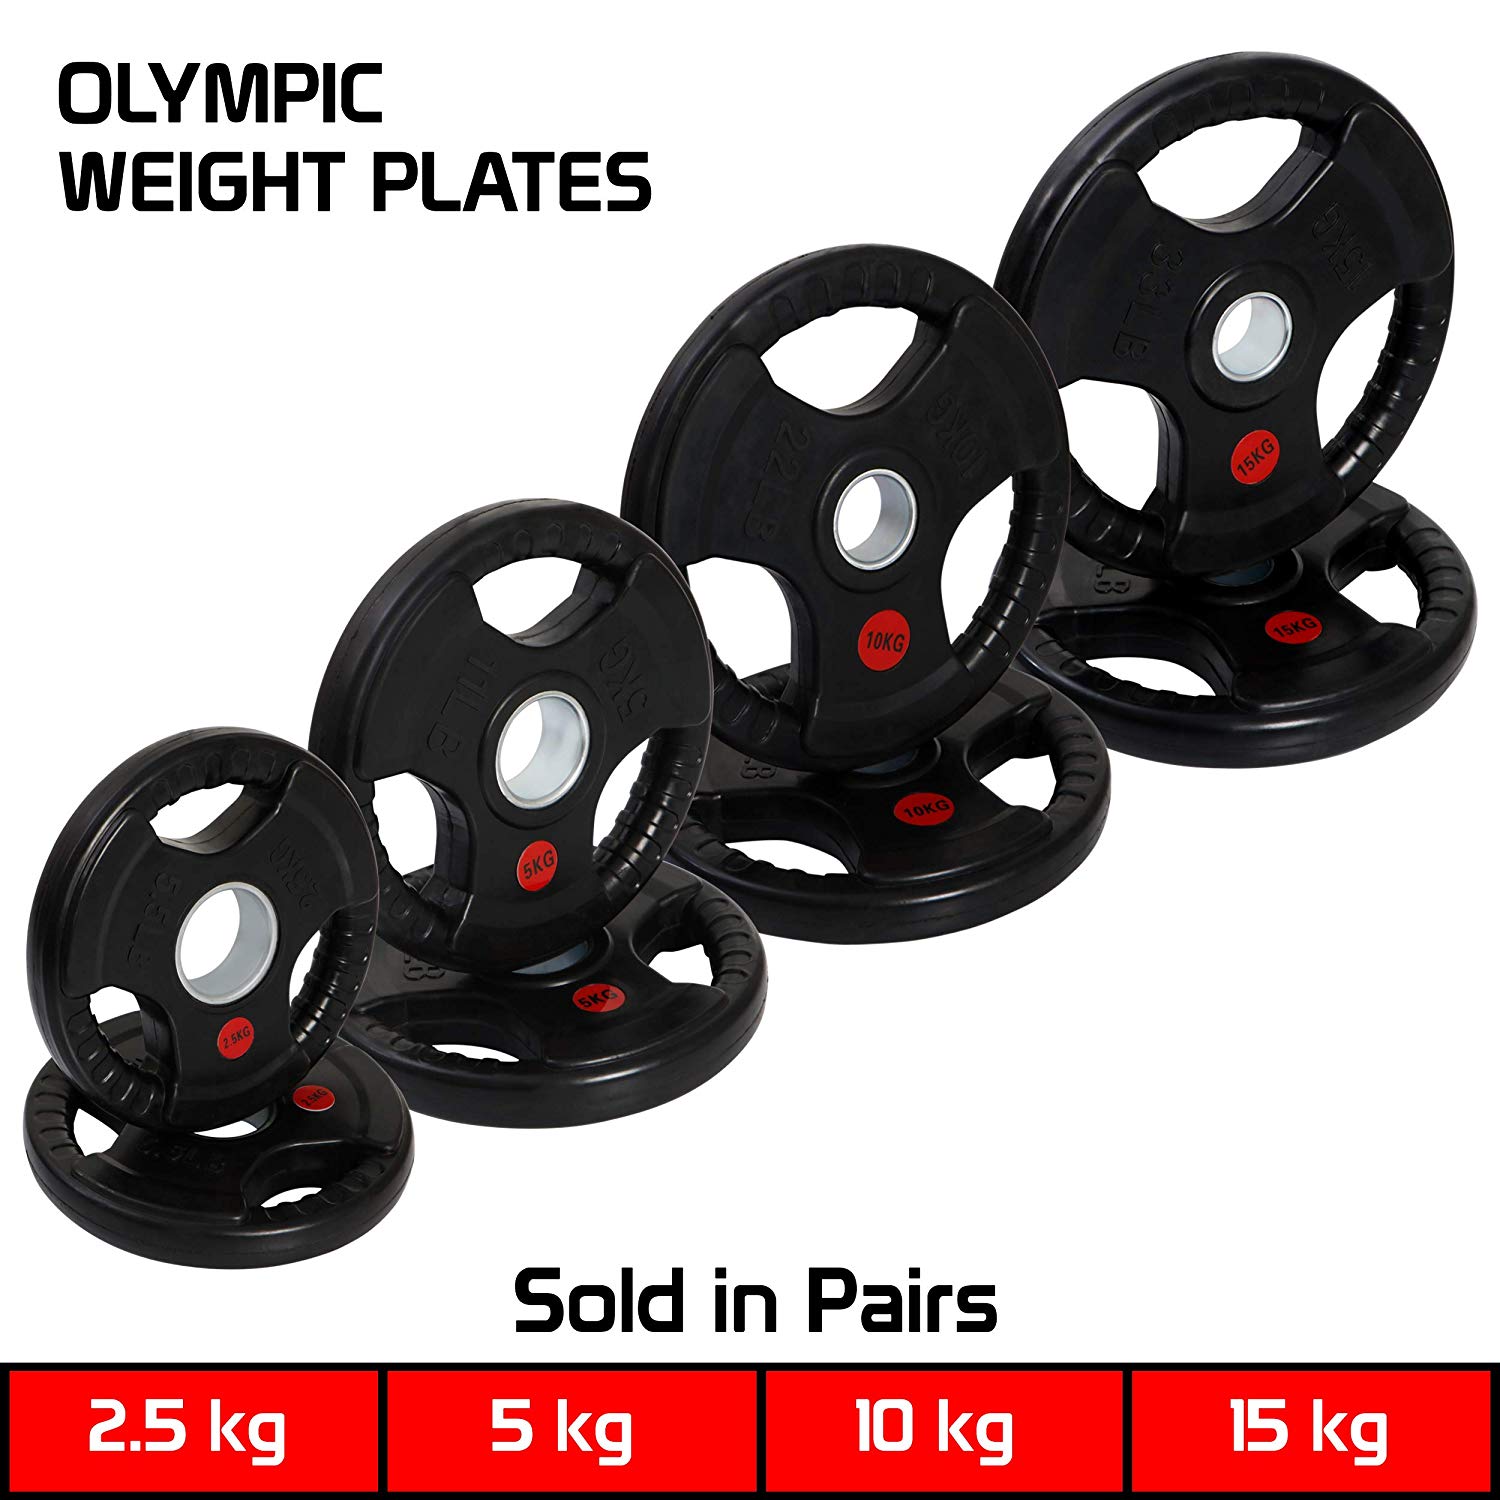 TRI-GRIP Olympic Weight Rubber Plates 15kg (Pair)